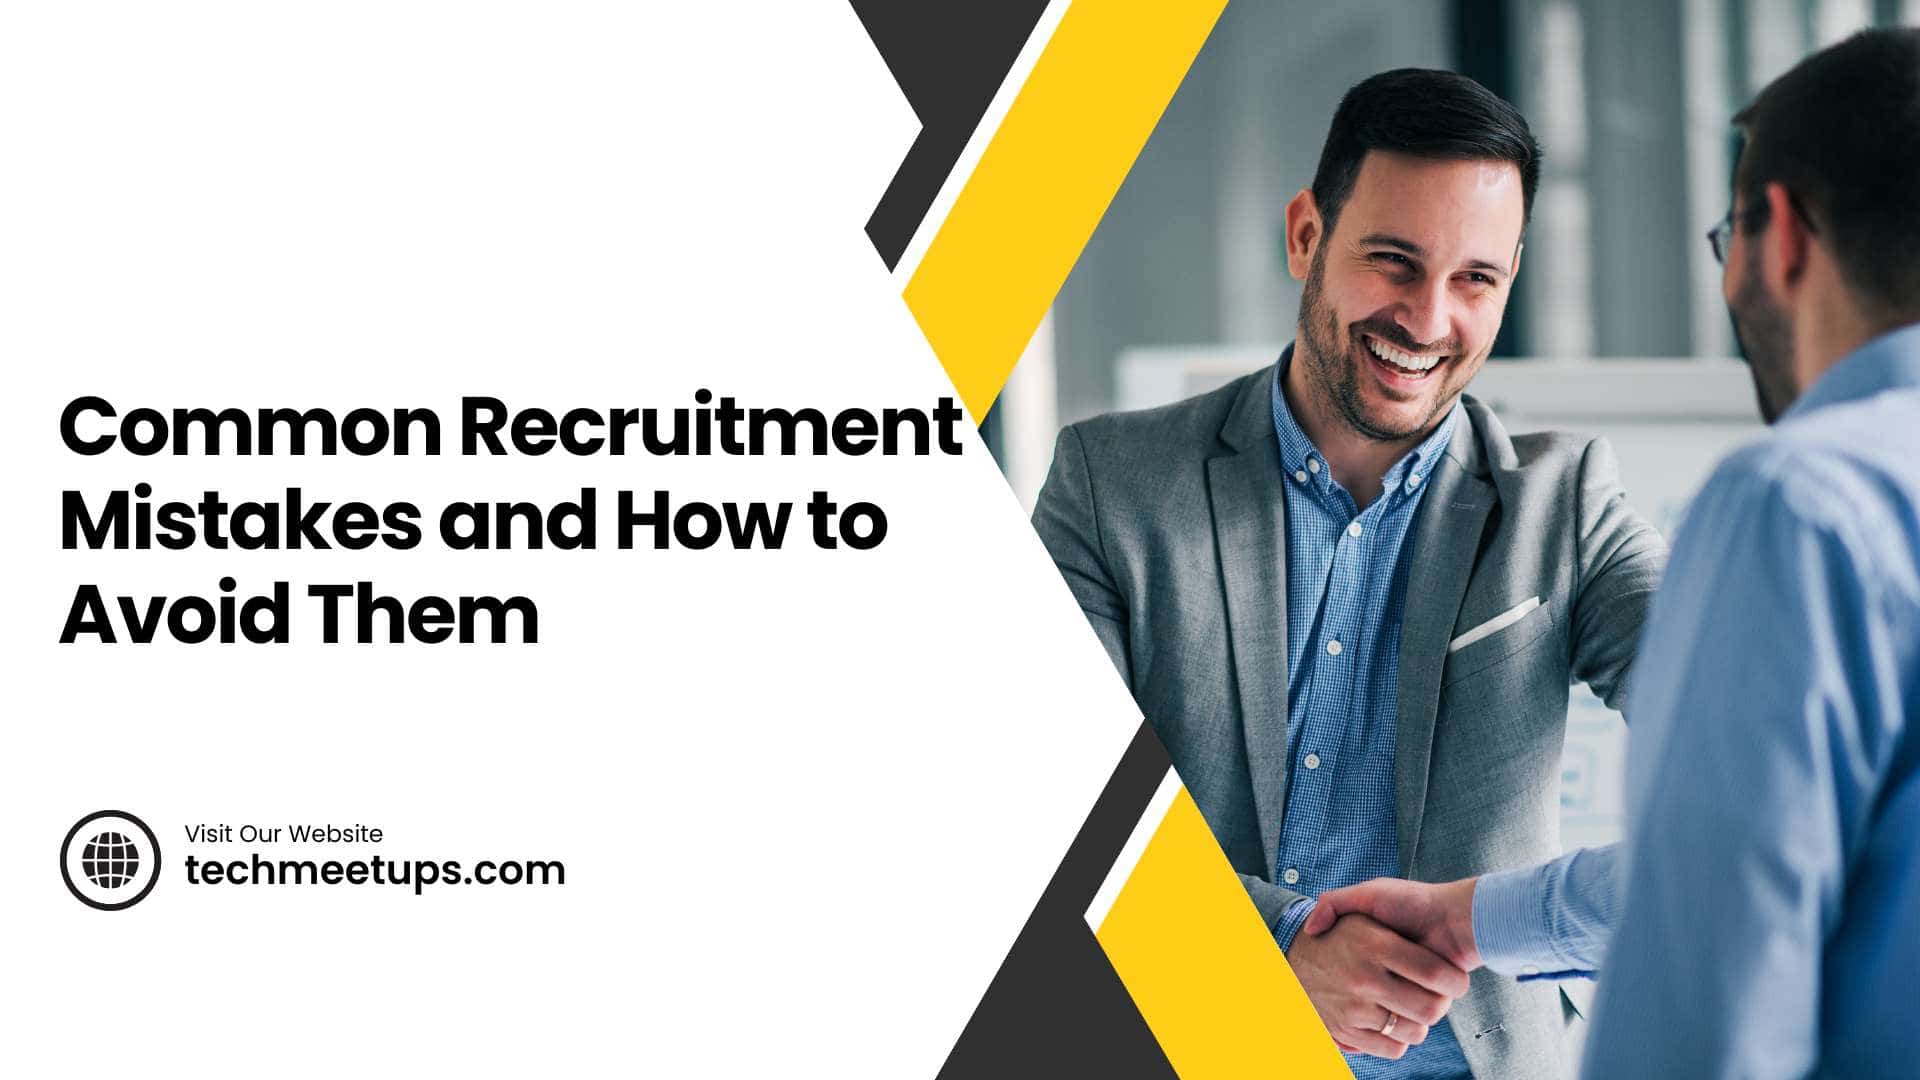 Common Recruitment Mistakes and How to Avoid Them